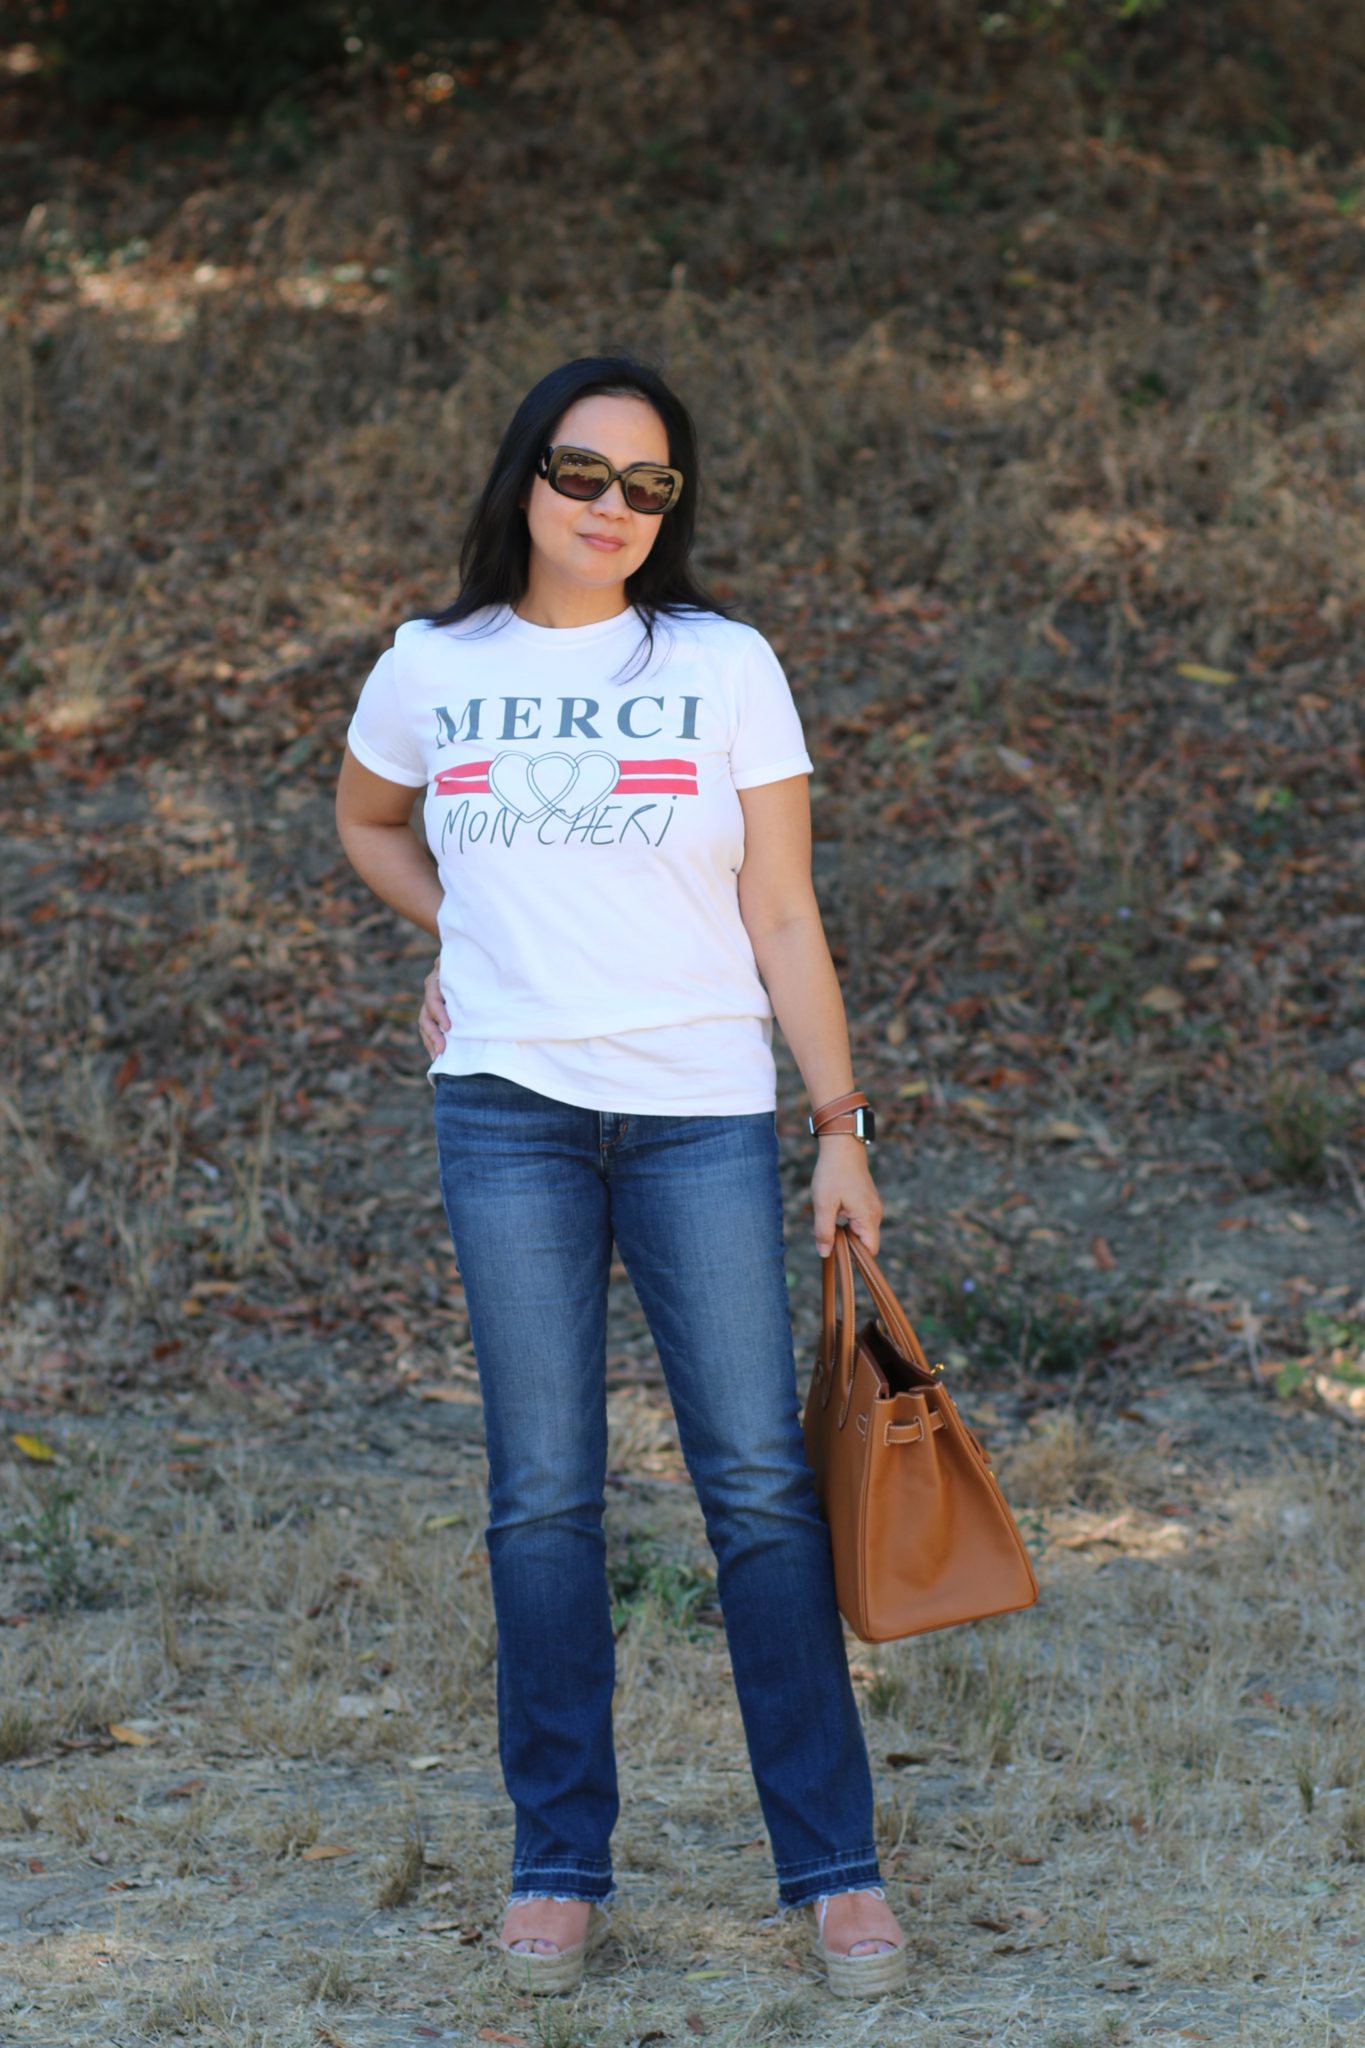 T-shirt and Jeans - A Classic Casual Outfit - My life and My style